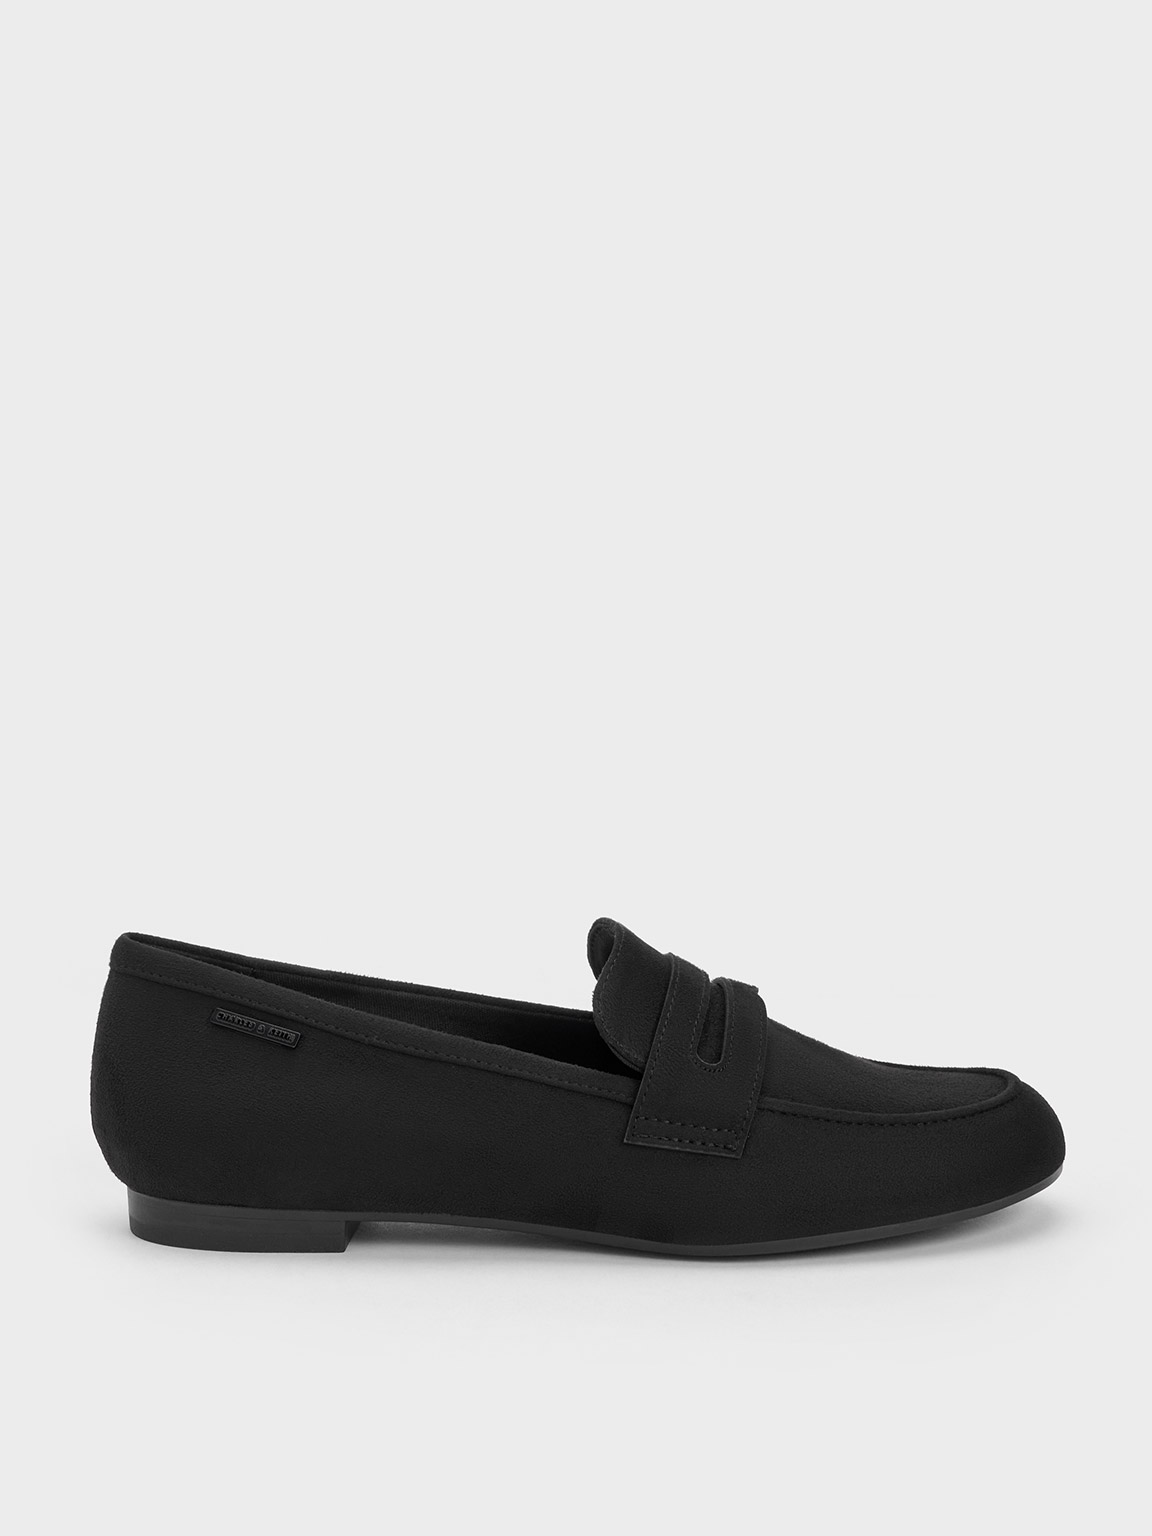 Textured Cut-Out Almond Toe Penny Loafers